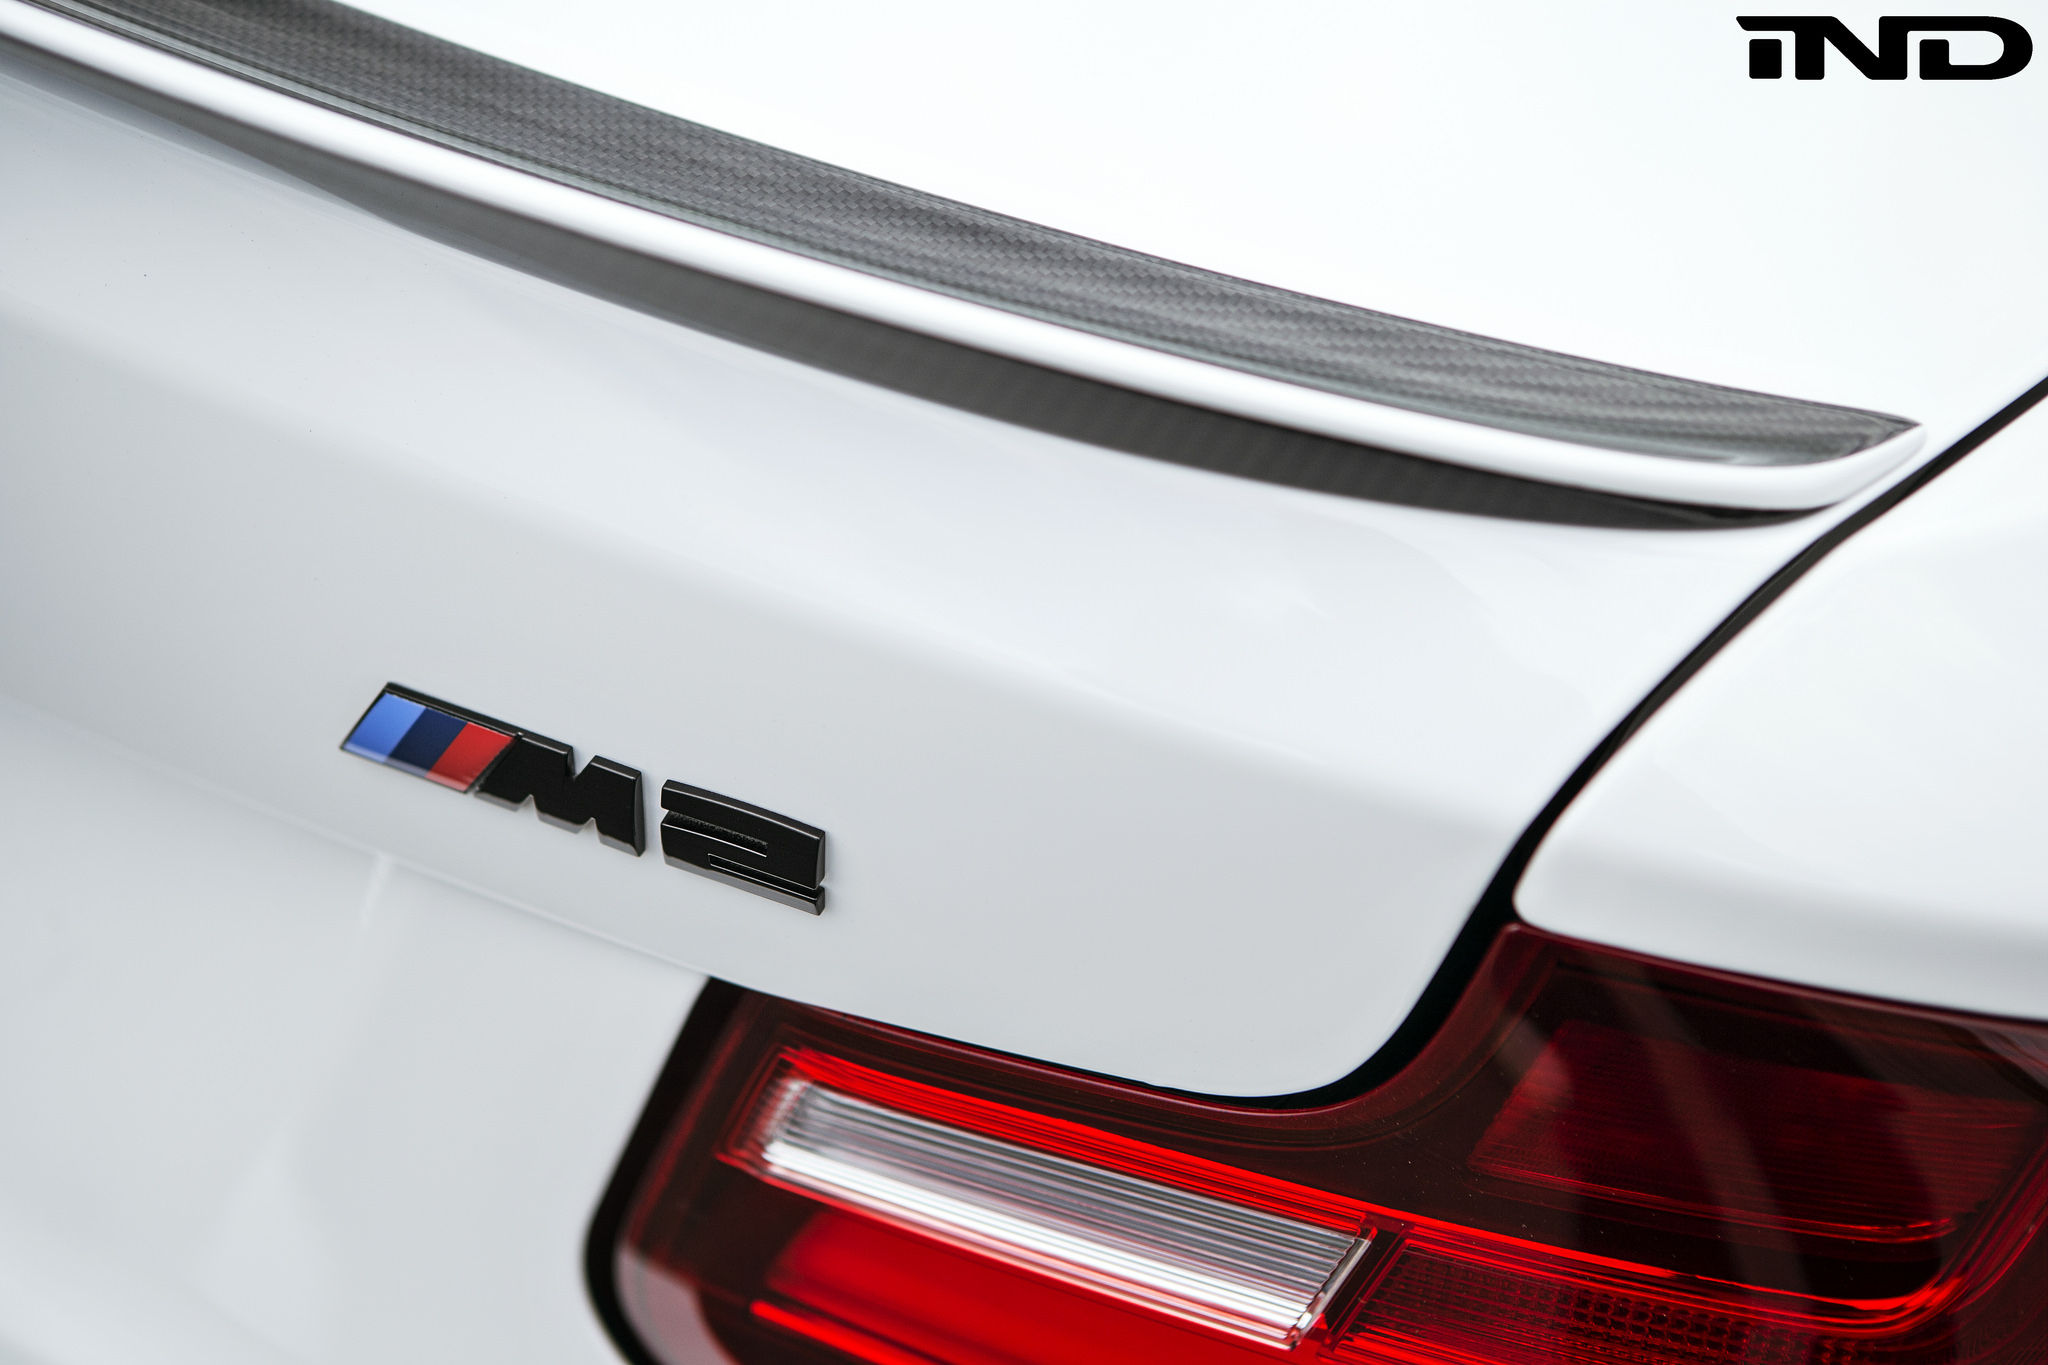 IND Distribution Releases The BMW M2 Program And Parts